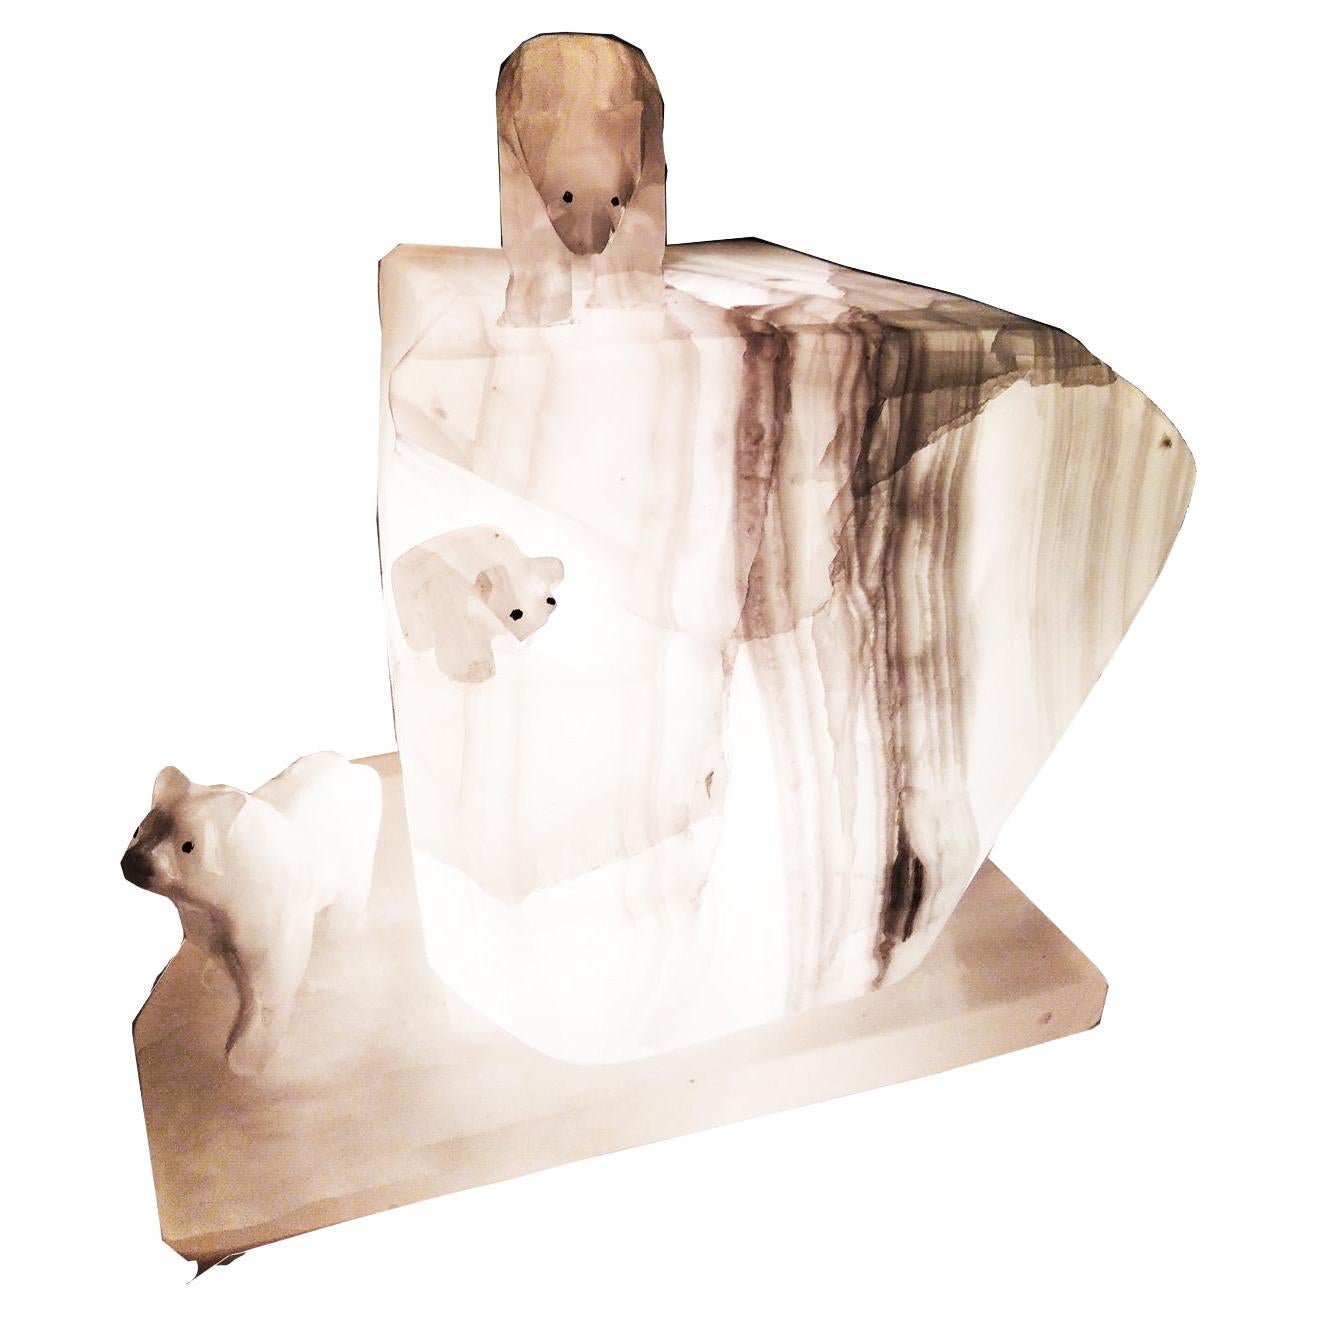 The energy of onyx properties
This semi-precious stone, being porous and absorbent, attracts negative energy and dissolves it.

Beautiful veined white onyx lamp in the shape of an Iceberg on which three white polar bears stand
It emits a soft